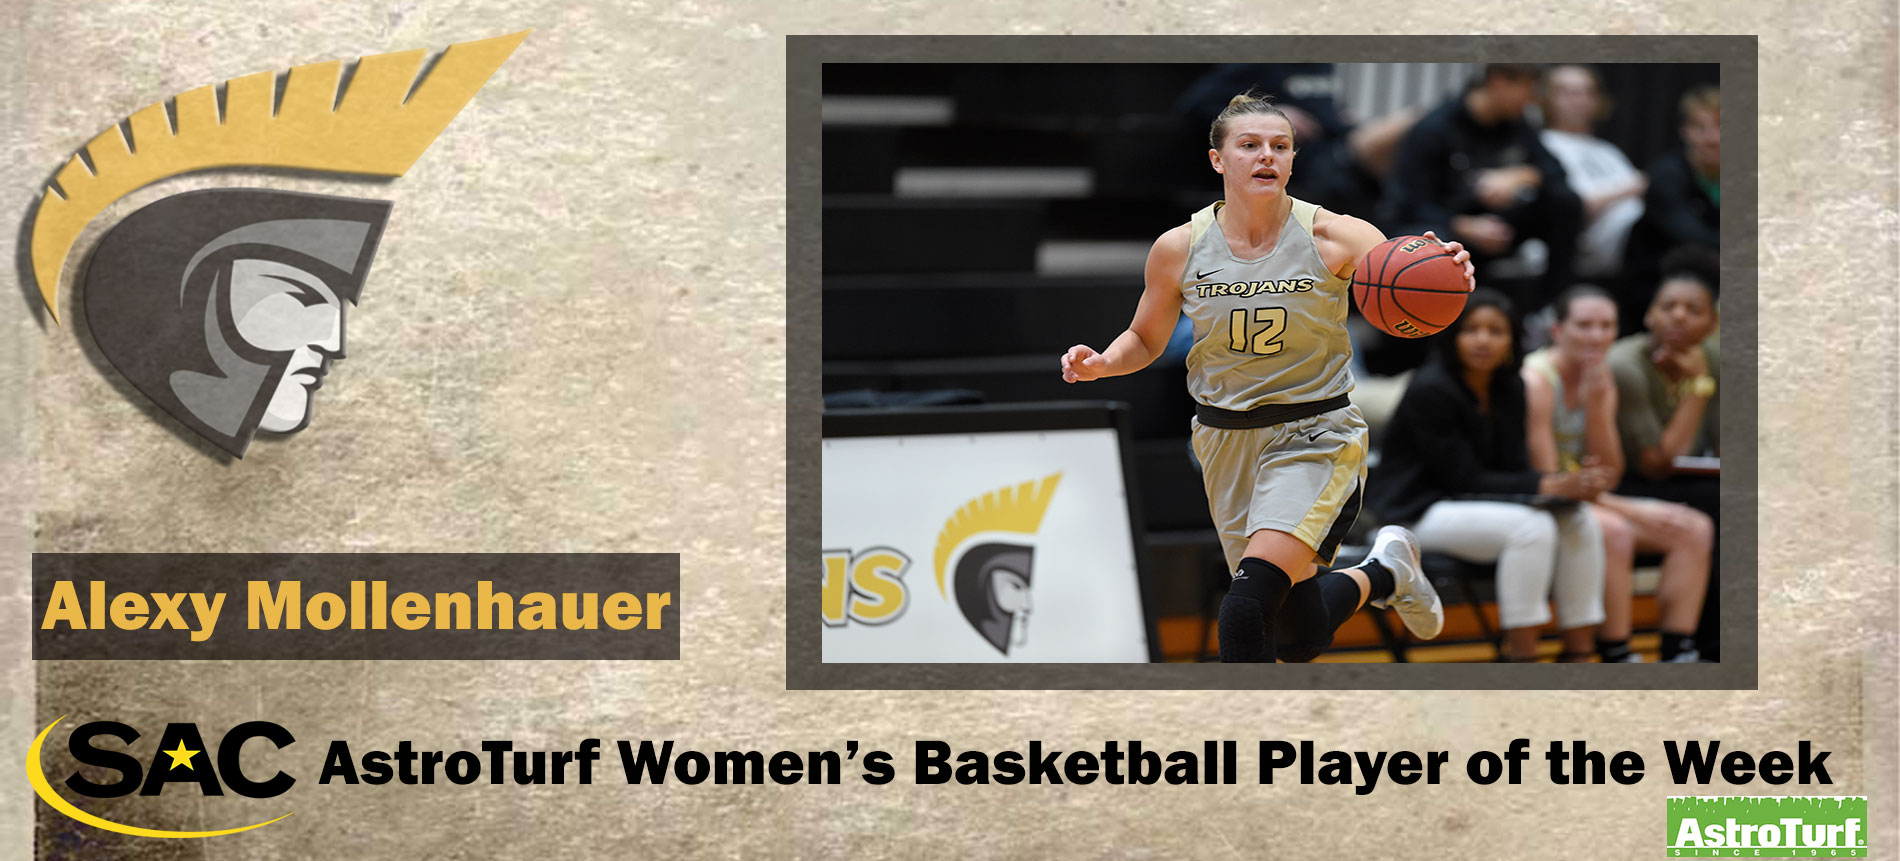 Mollenhauer Earns South Atlantic Conference AstroTurf Women’s Basketball Player of the Week